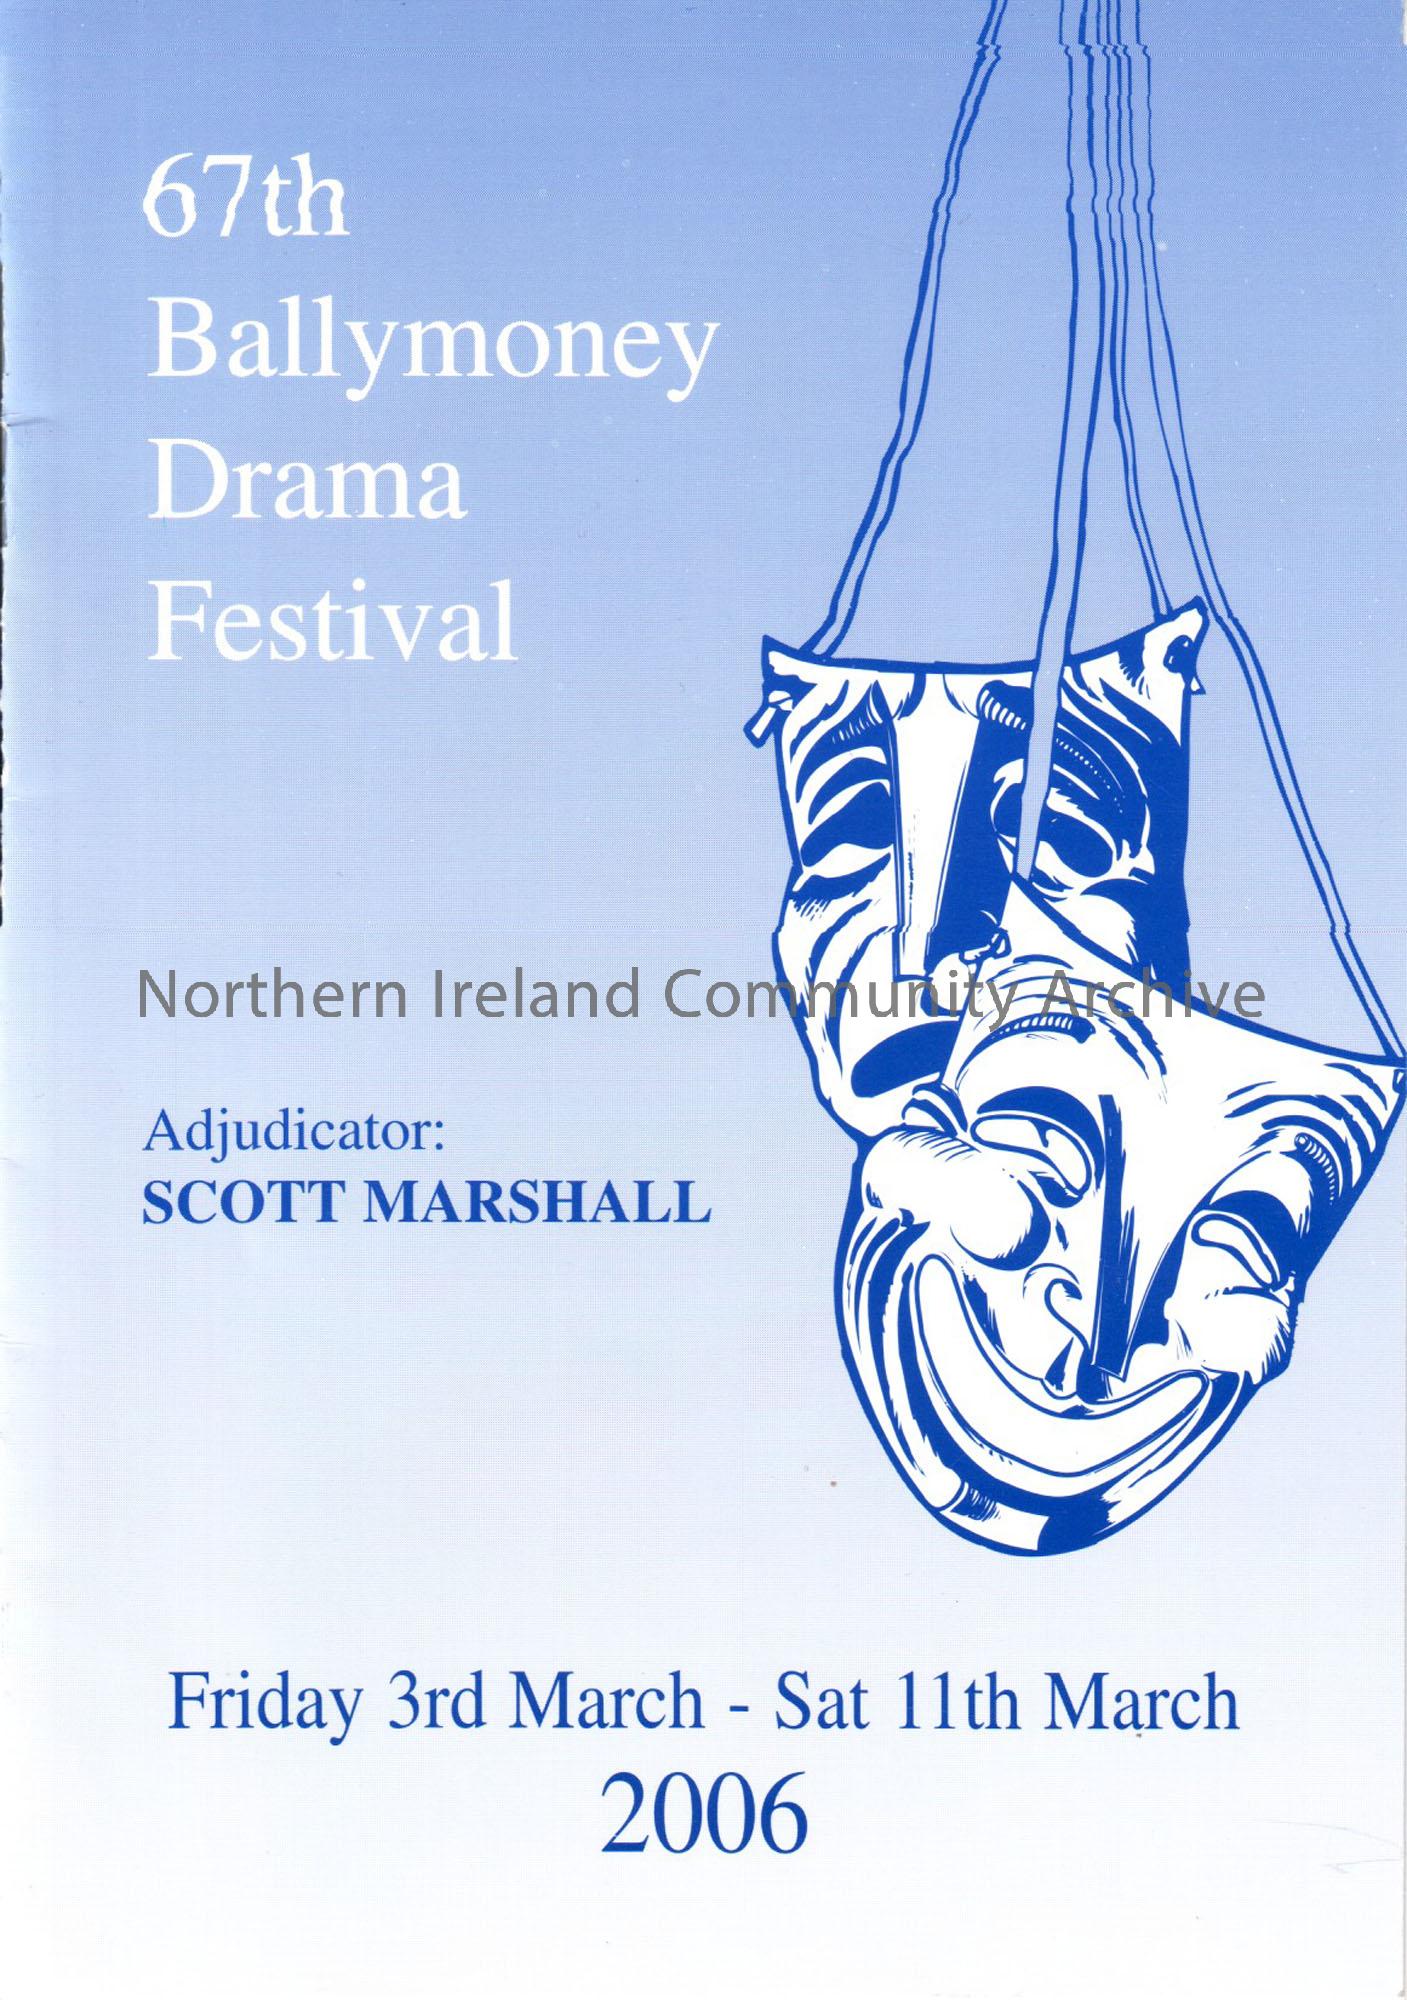 Programme of 67th Ballymoney Drama Festival,2006 3rd March to 11th March